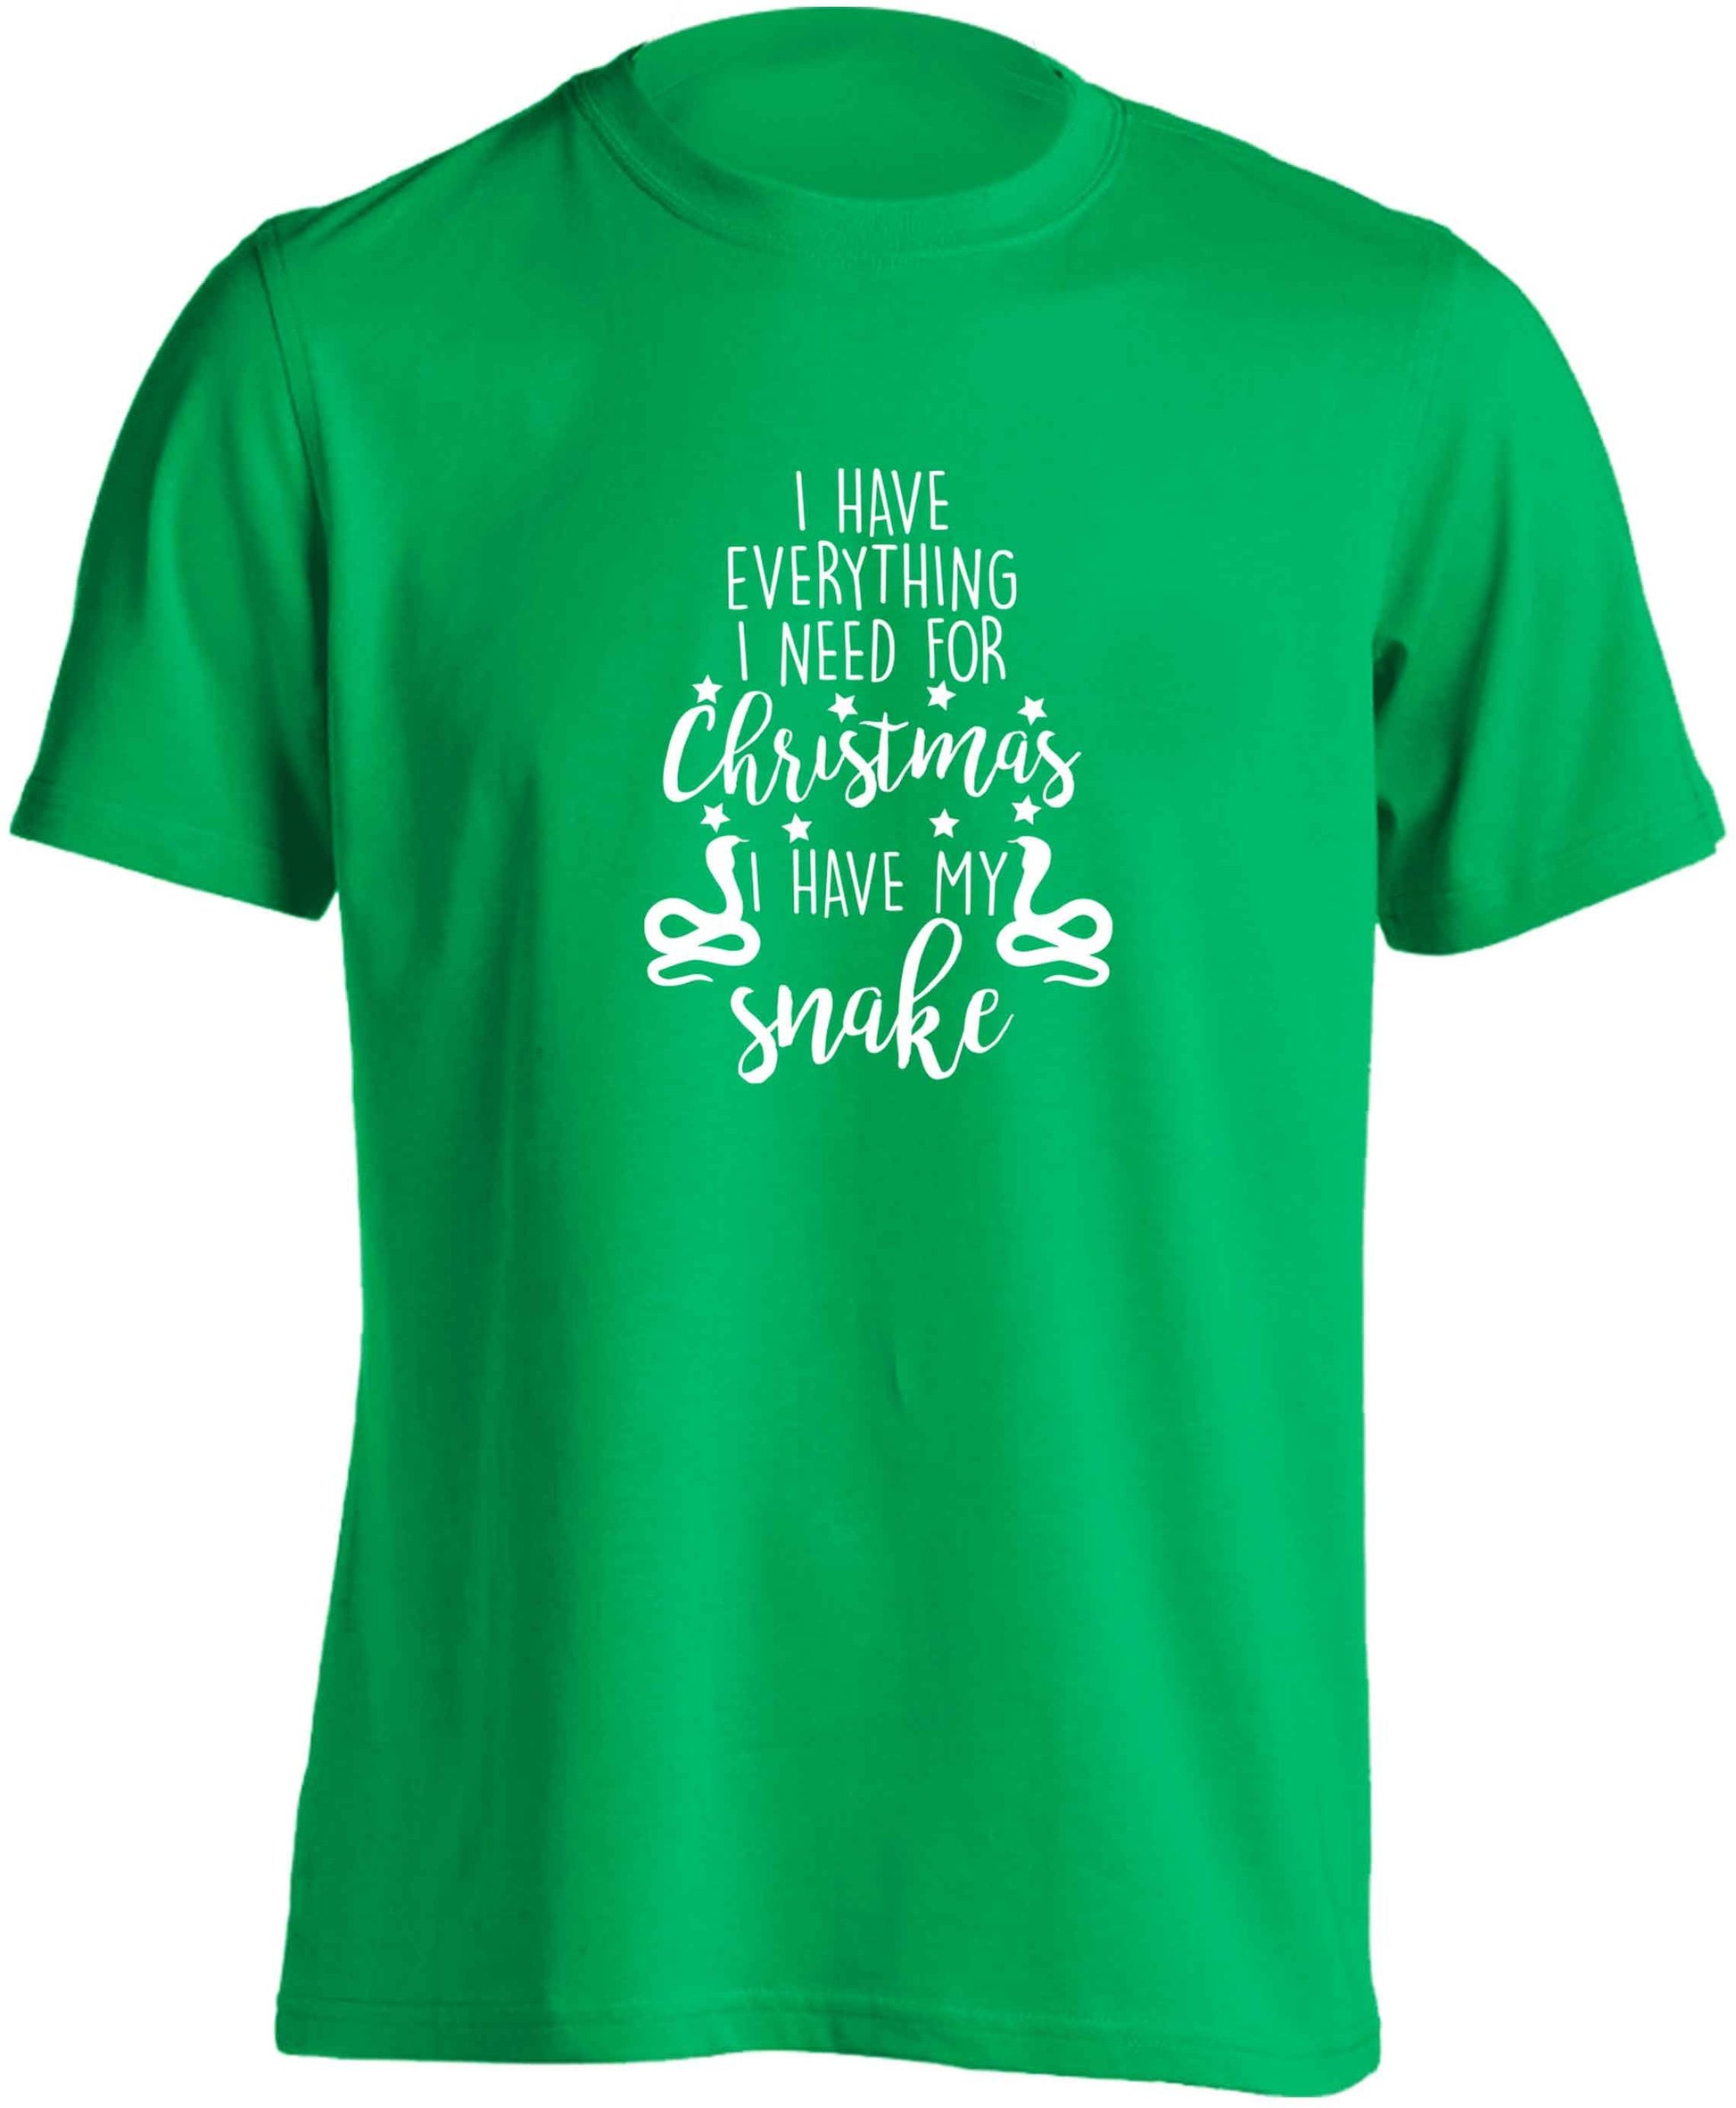 I have everything I need for Christmas I have my snake adults unisex green Tshirt 2XL